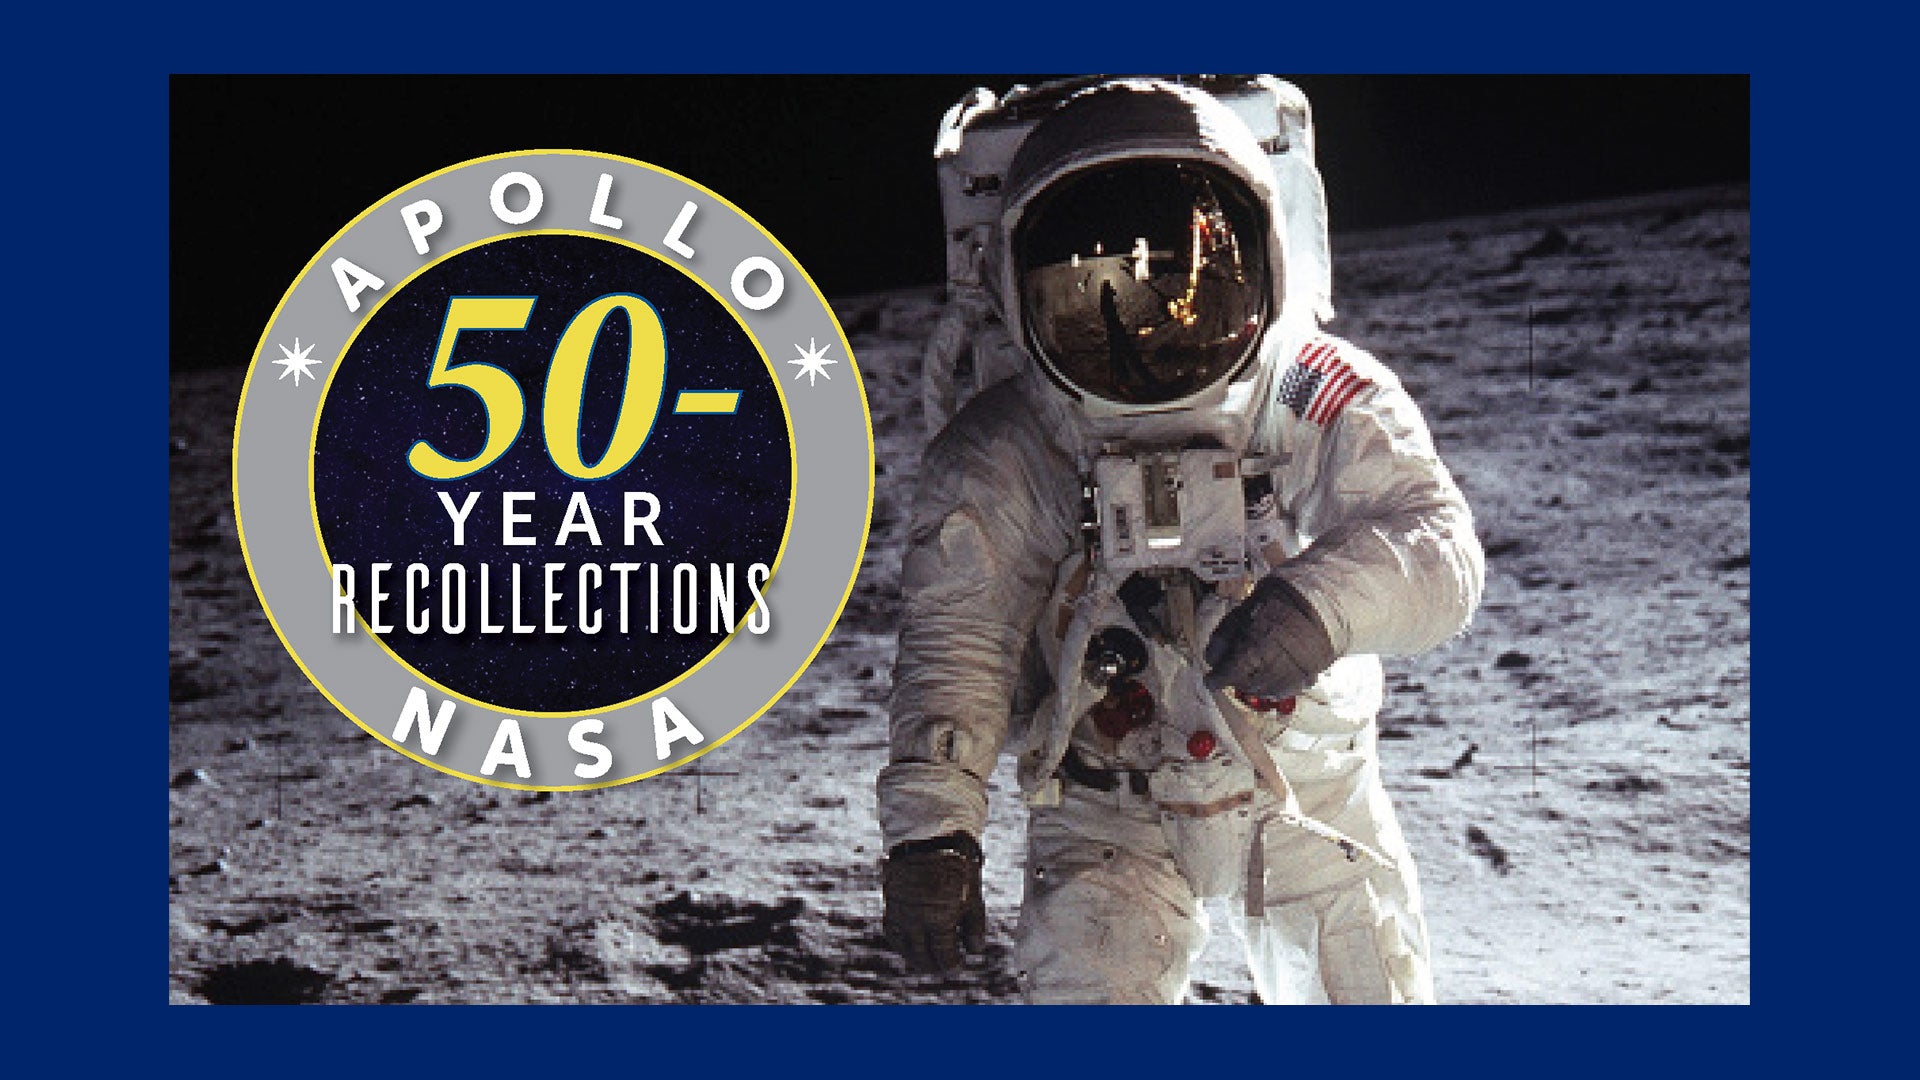 Rice Space Institute hosts two events celebrating the 50th Anniversary of the Apollo 11 Moon Landing 